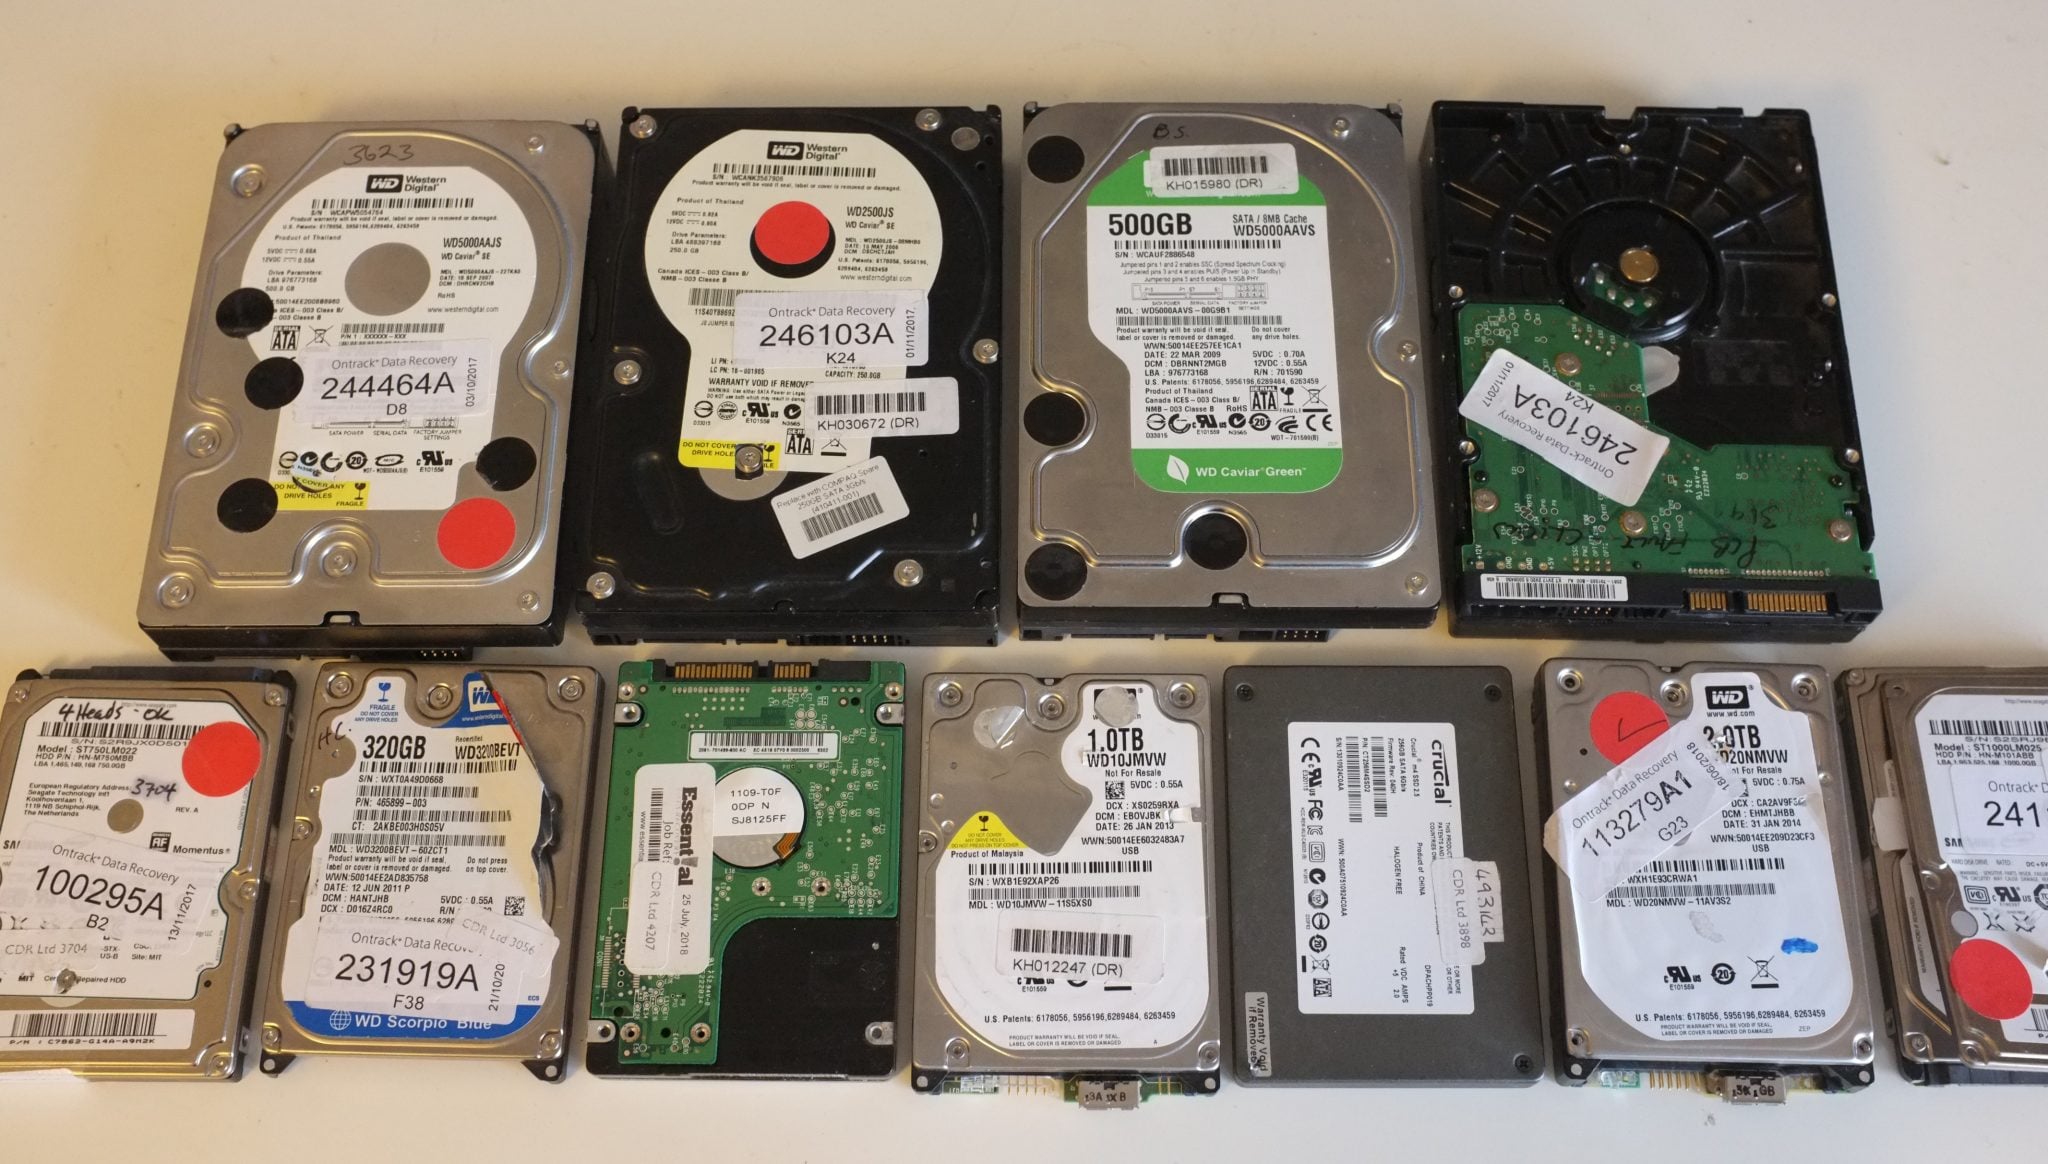 Multiple HDDs previously opened by data recovery companies